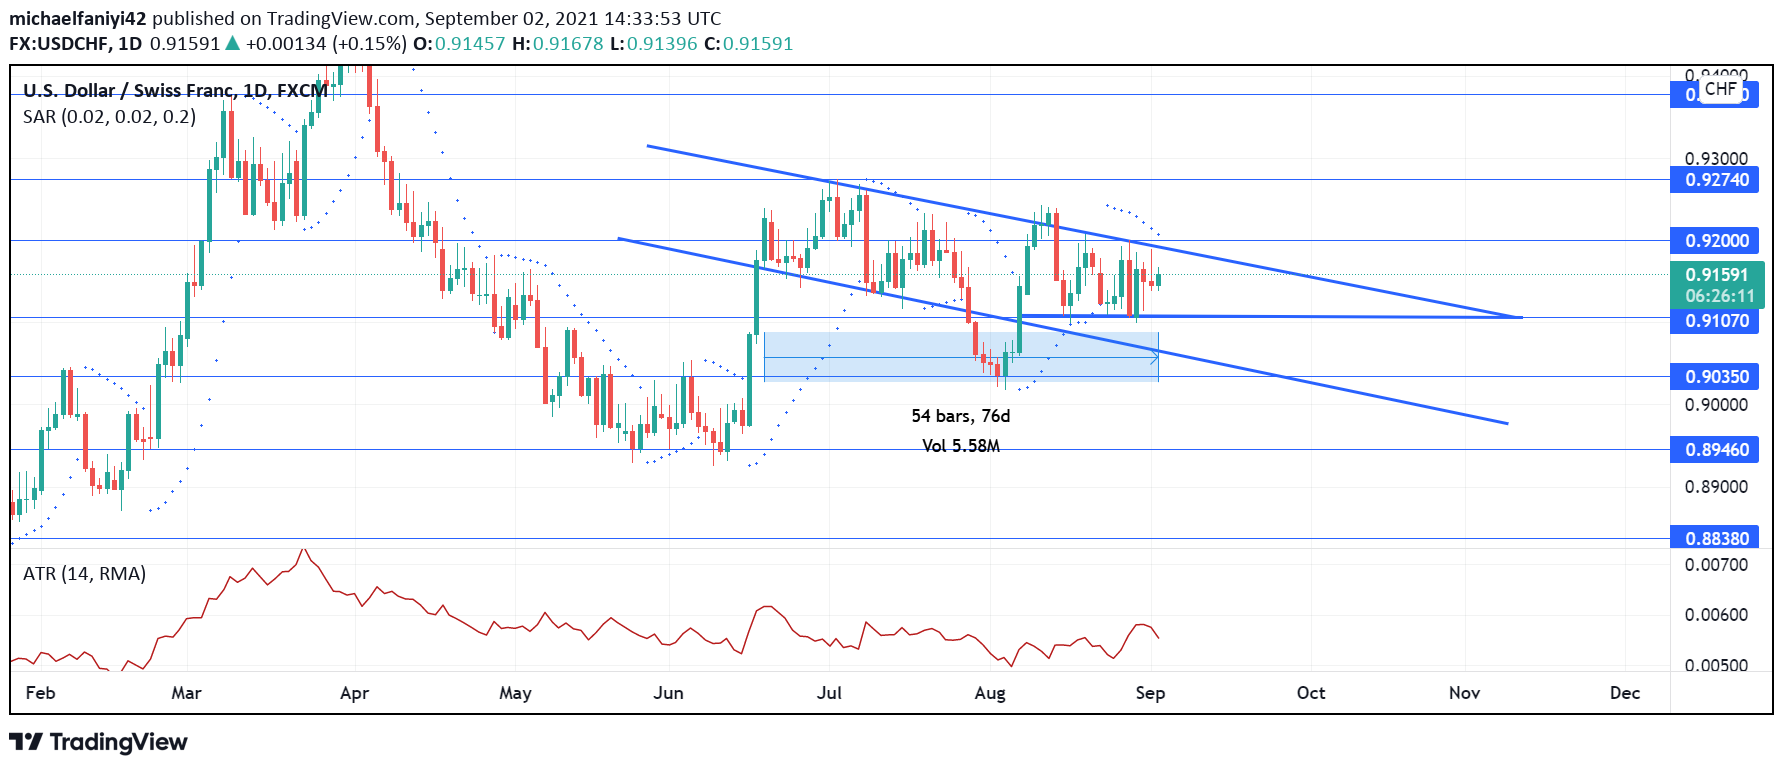 USDCHF is trading in a downtrend